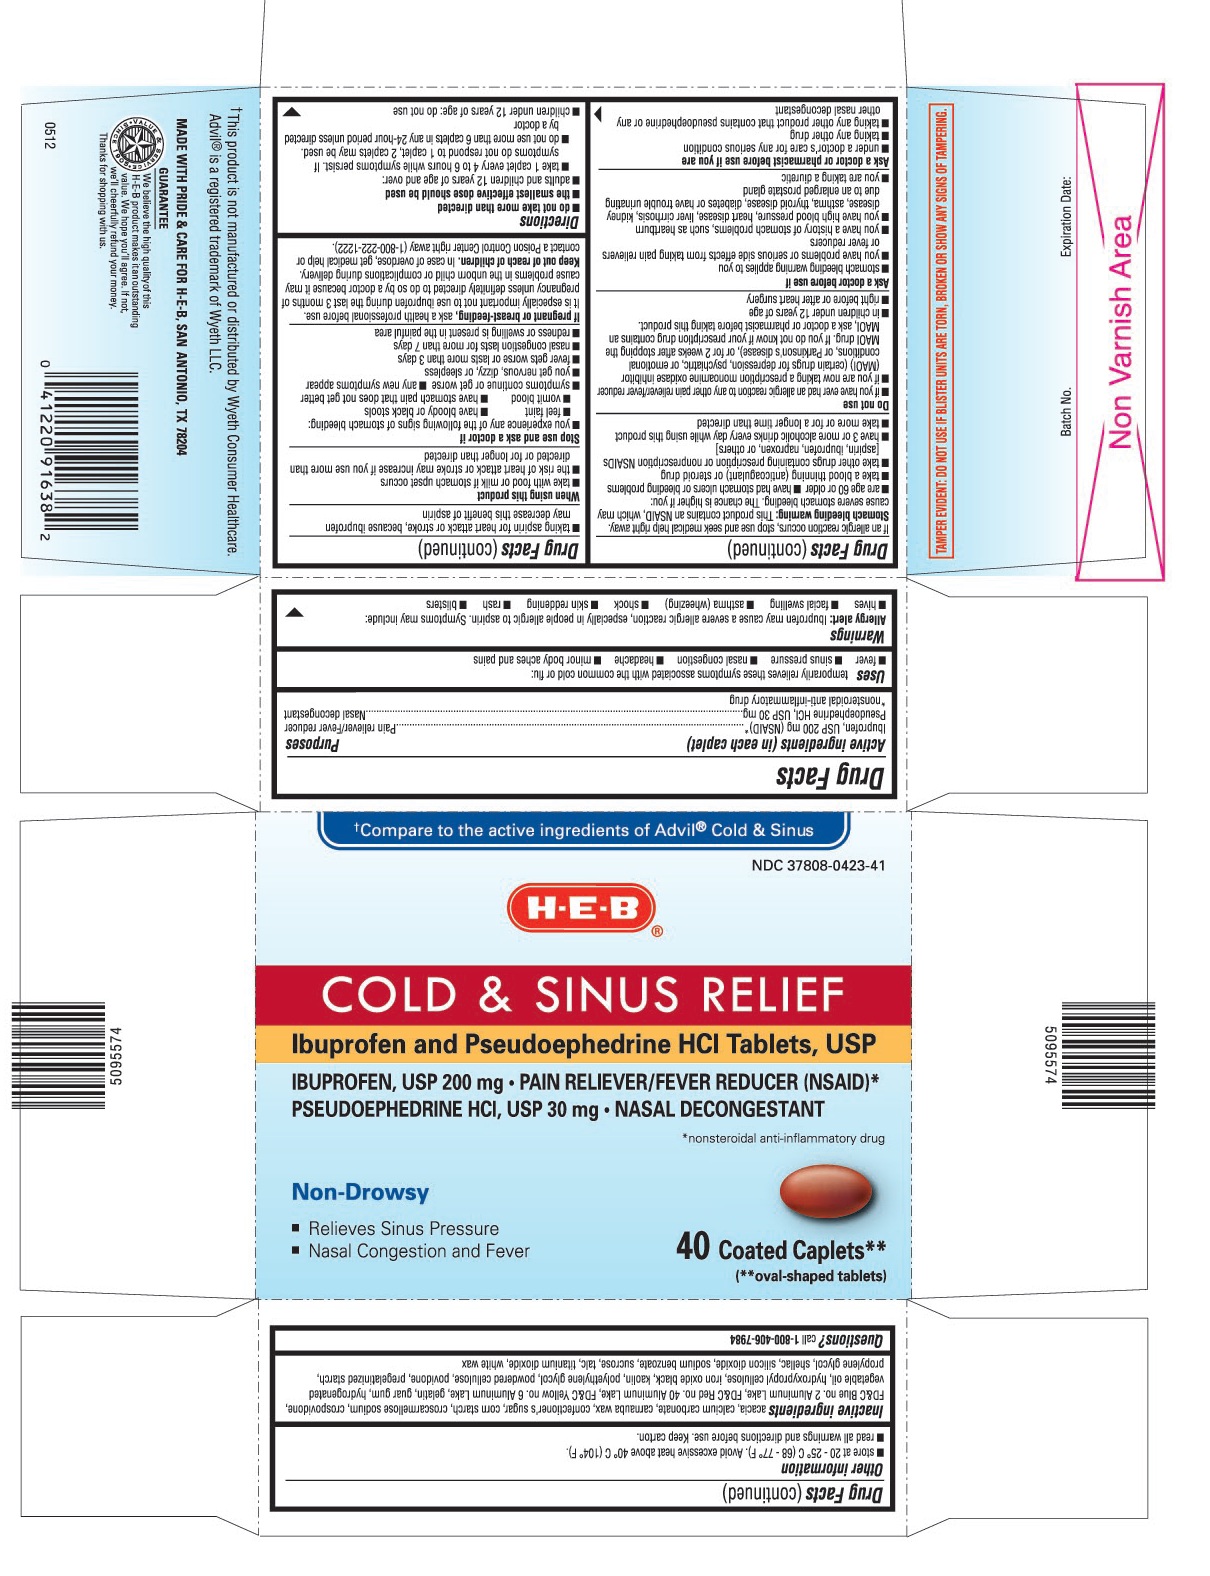 This is the 40 count blister carton label for HEB Ibuprofen and Pseudoephedrine HCl Tablets, USP